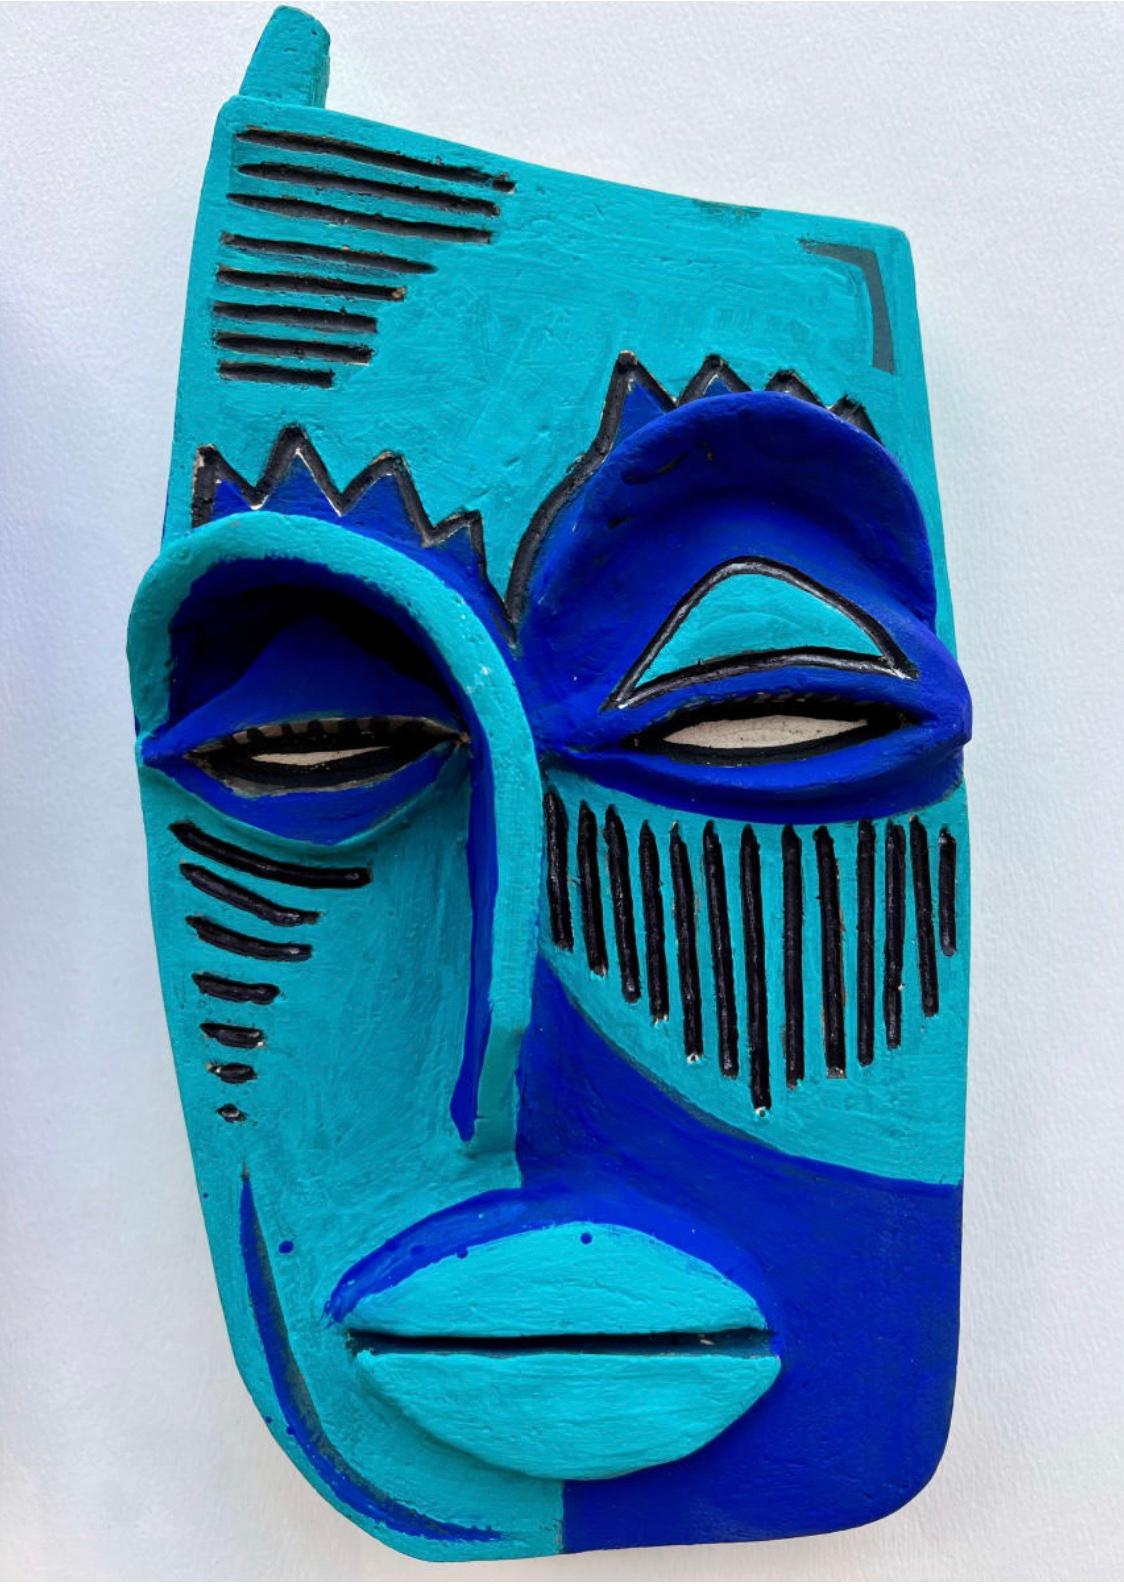 Clay mask with a face outline painted in light and dark blue tones with black outlines. 

Unique one of a kind painting signed by the artist. 

ARTIST BIO 
Alice Mizrachi is a New York based interdisciplinary artist and educator working in the